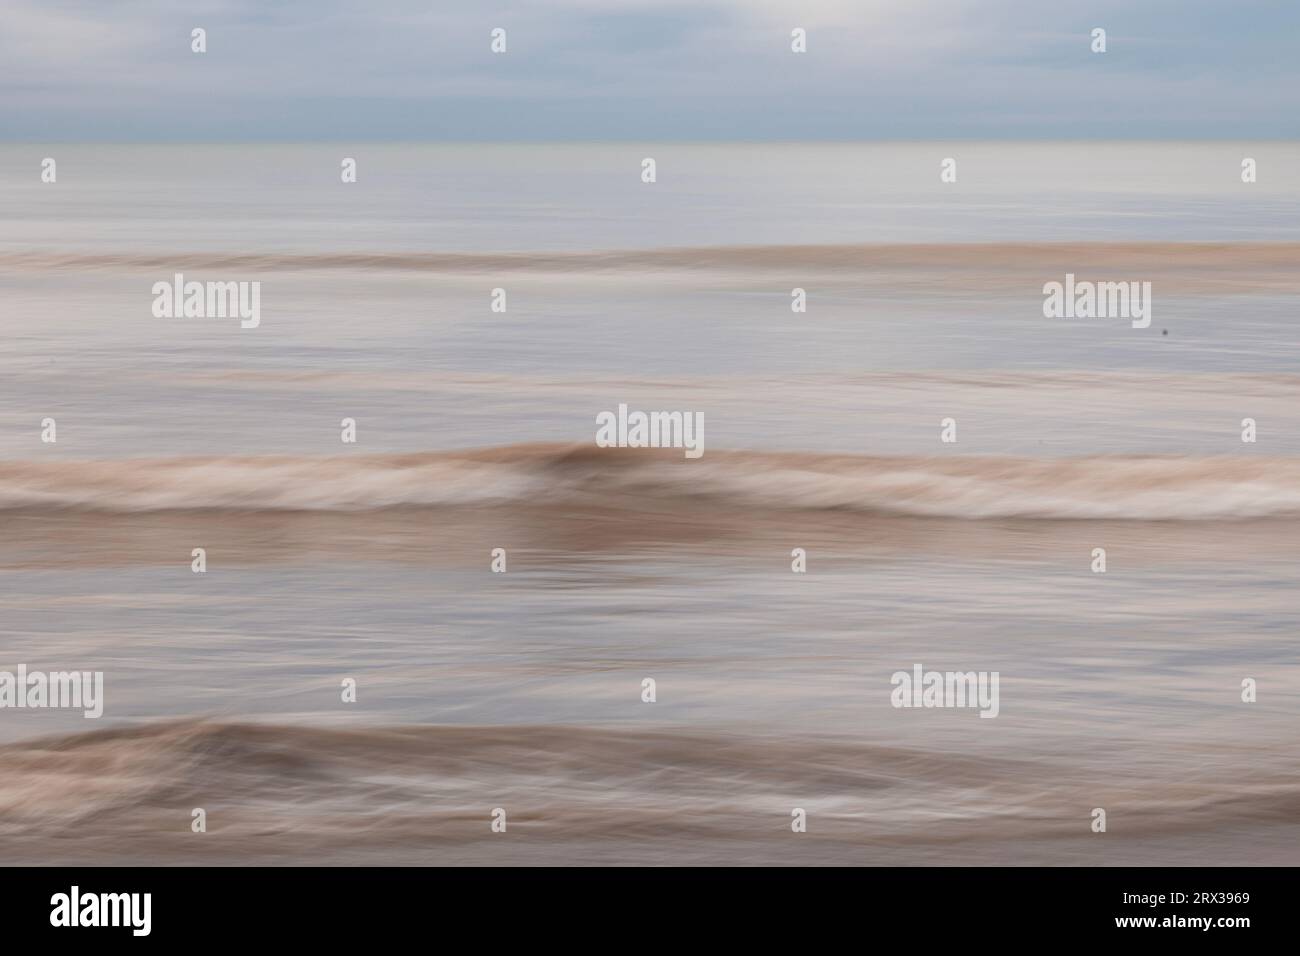 intentional camera movement of waves breaking on a beach in Worthing, West Sussex, UK Stock Photo